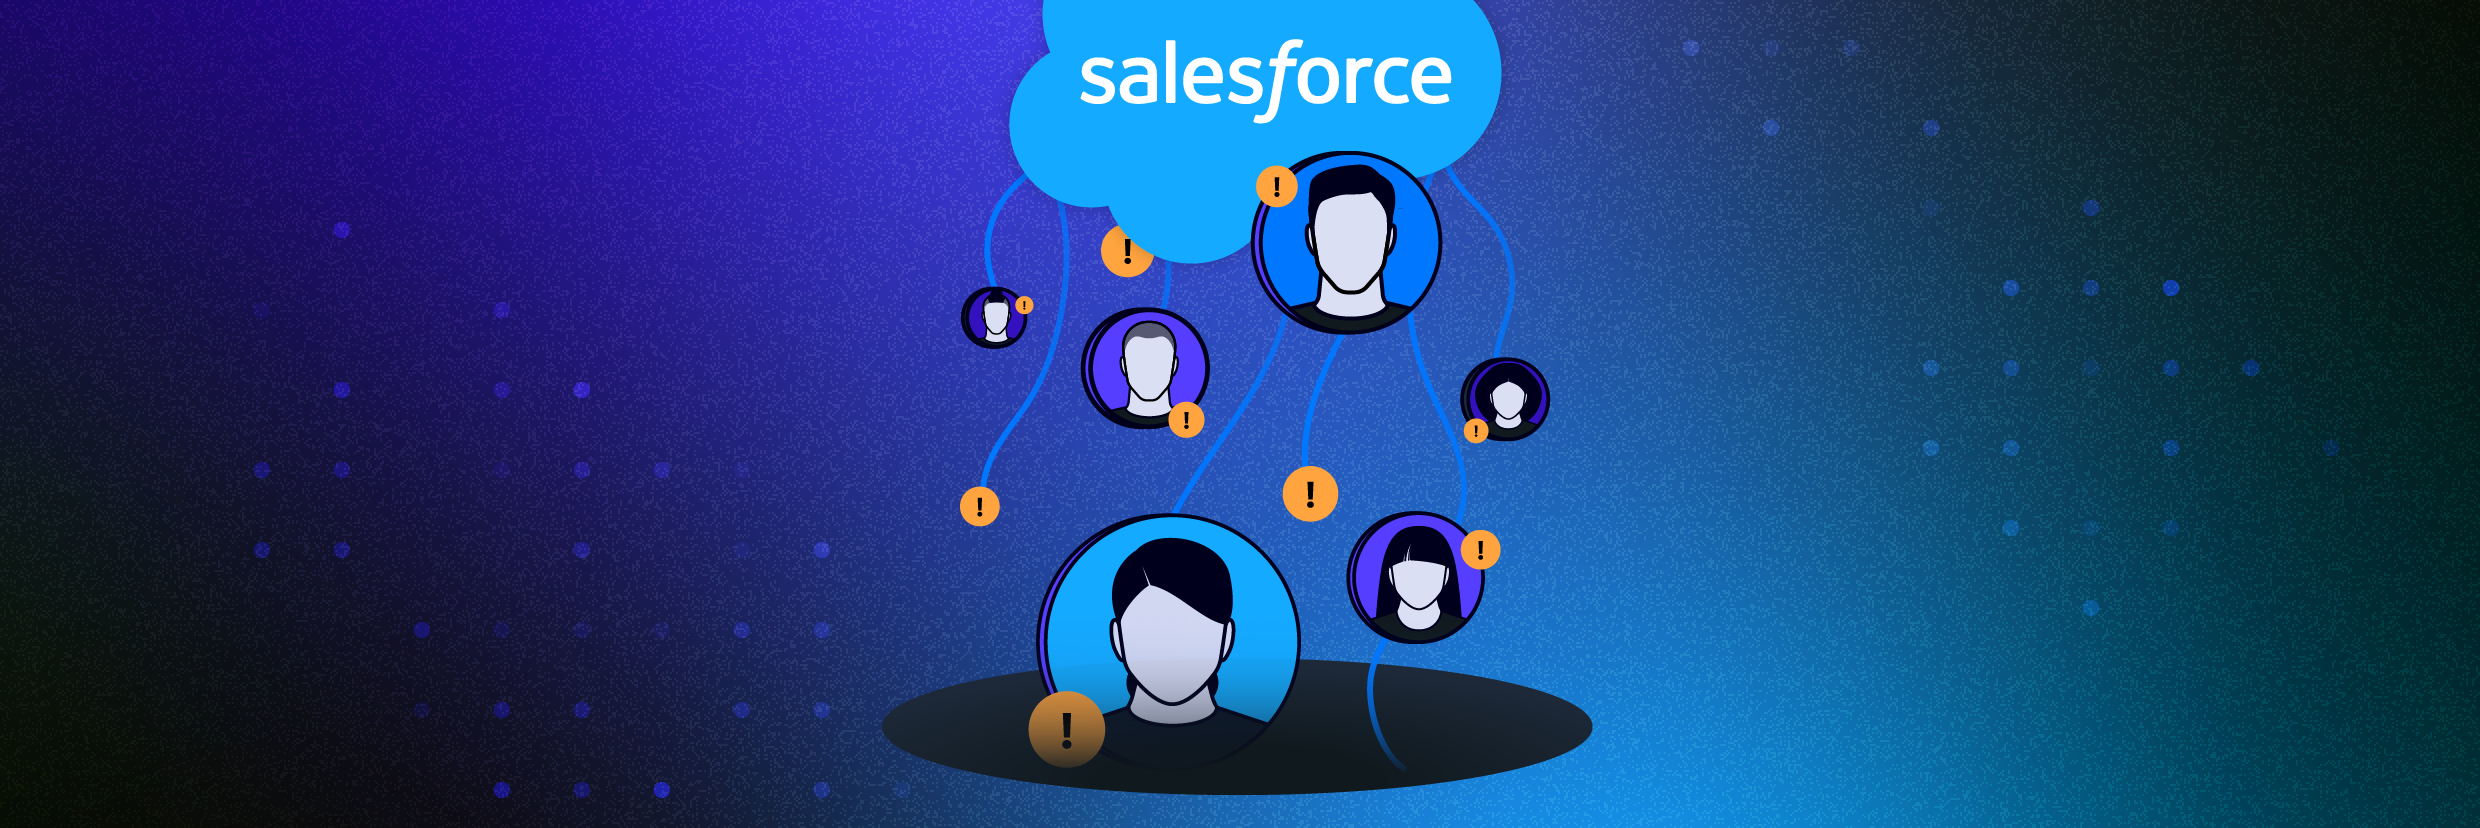 Salesforce logo with users floating to the top, showcasing too many shared permissions and profile accesses